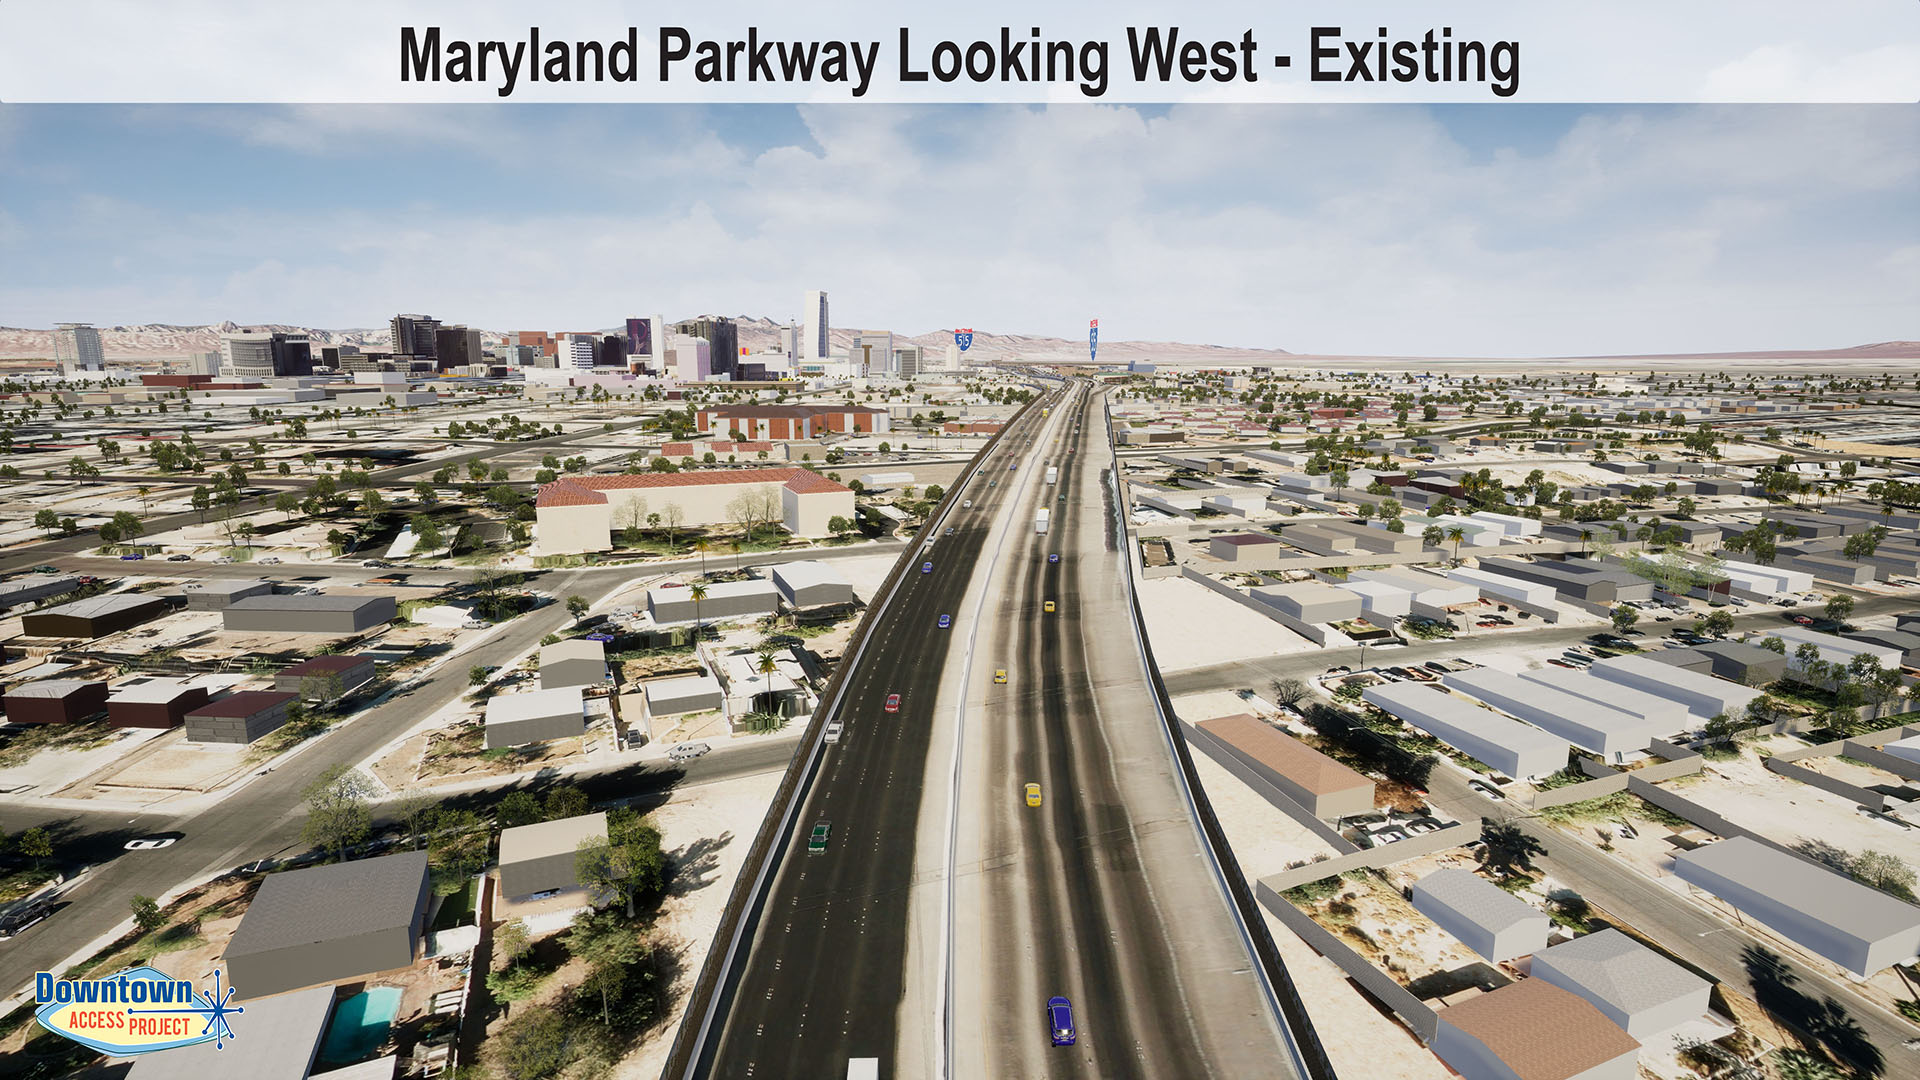 Maryland Parkway Looking West - Existing